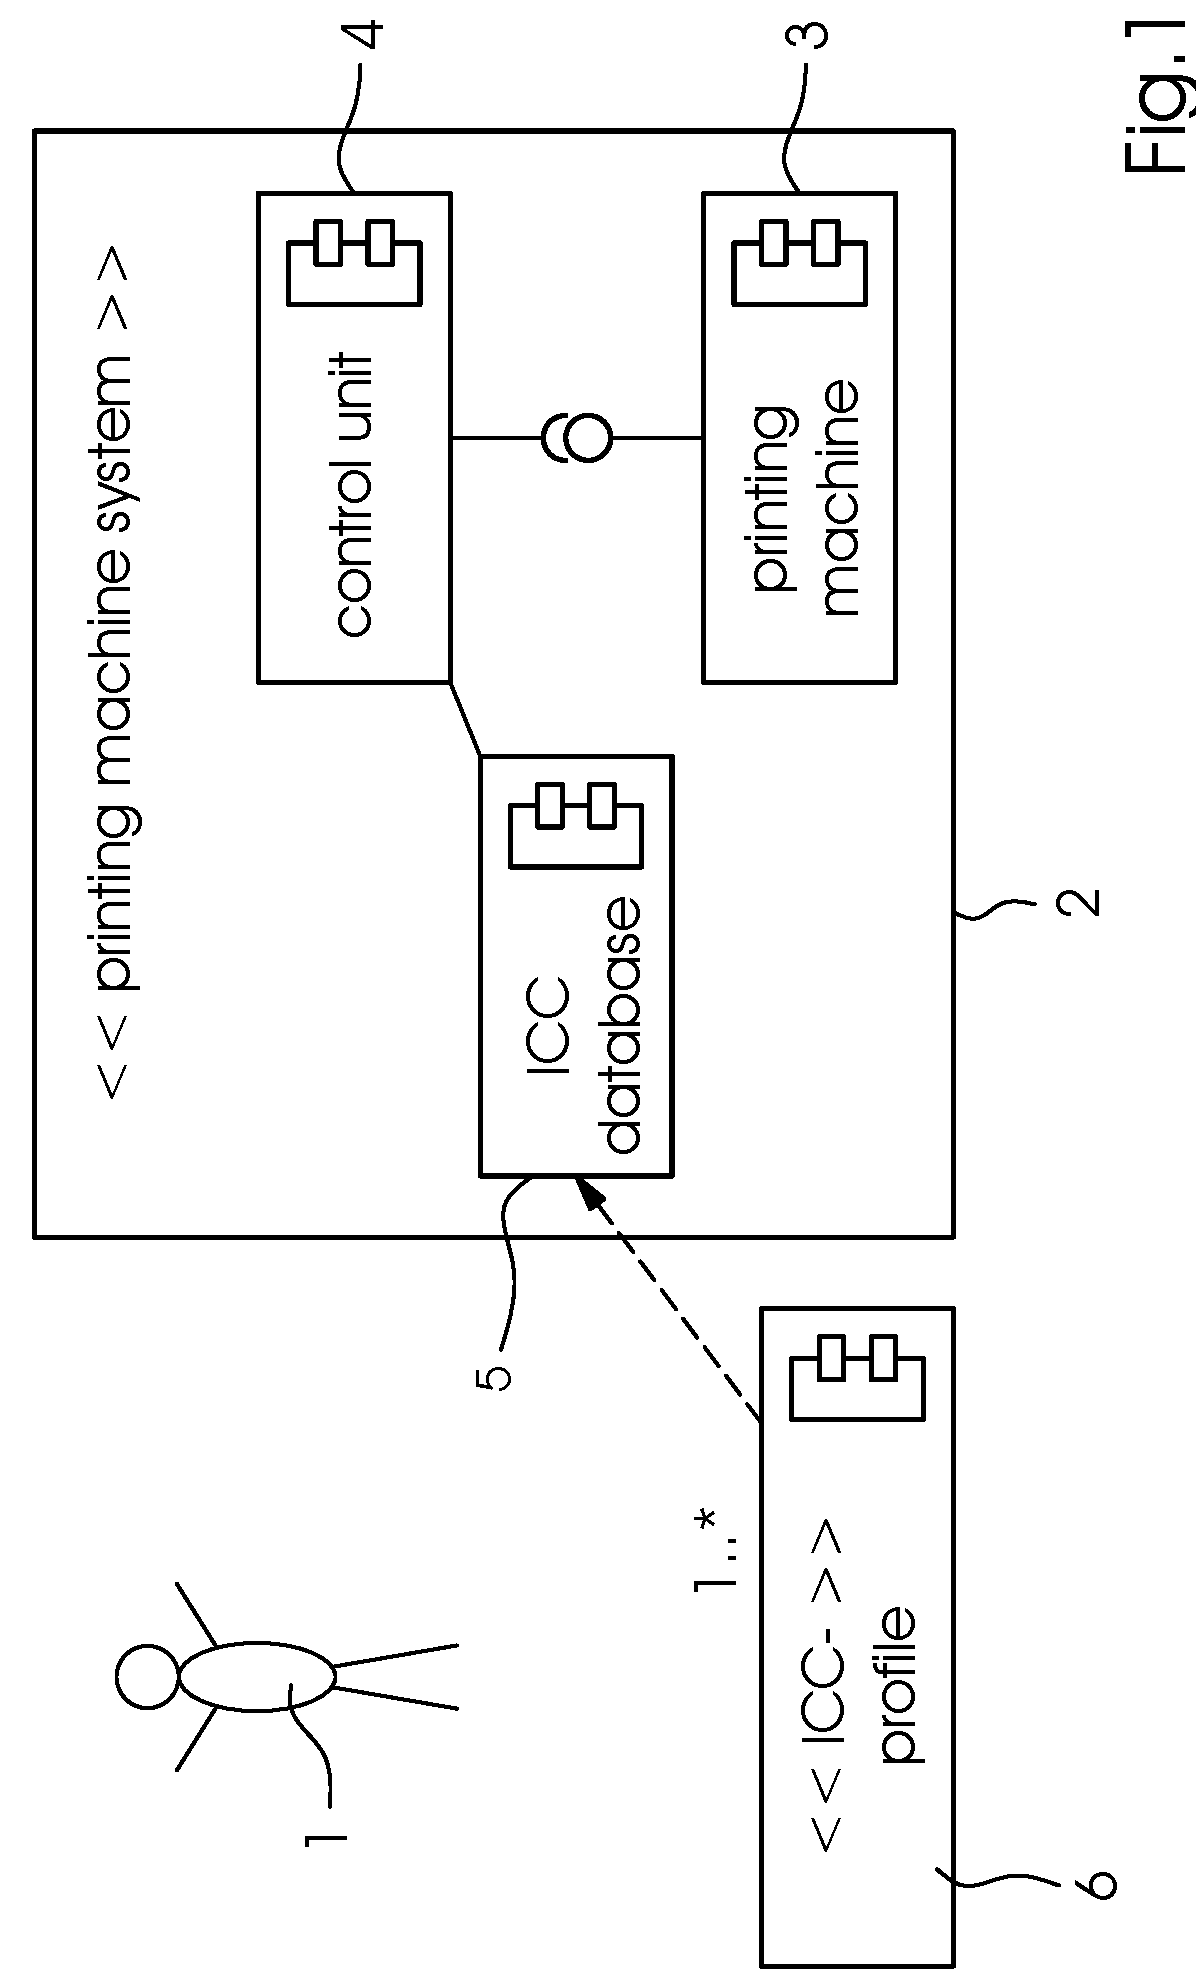 Method for optimized color control in a printing machine